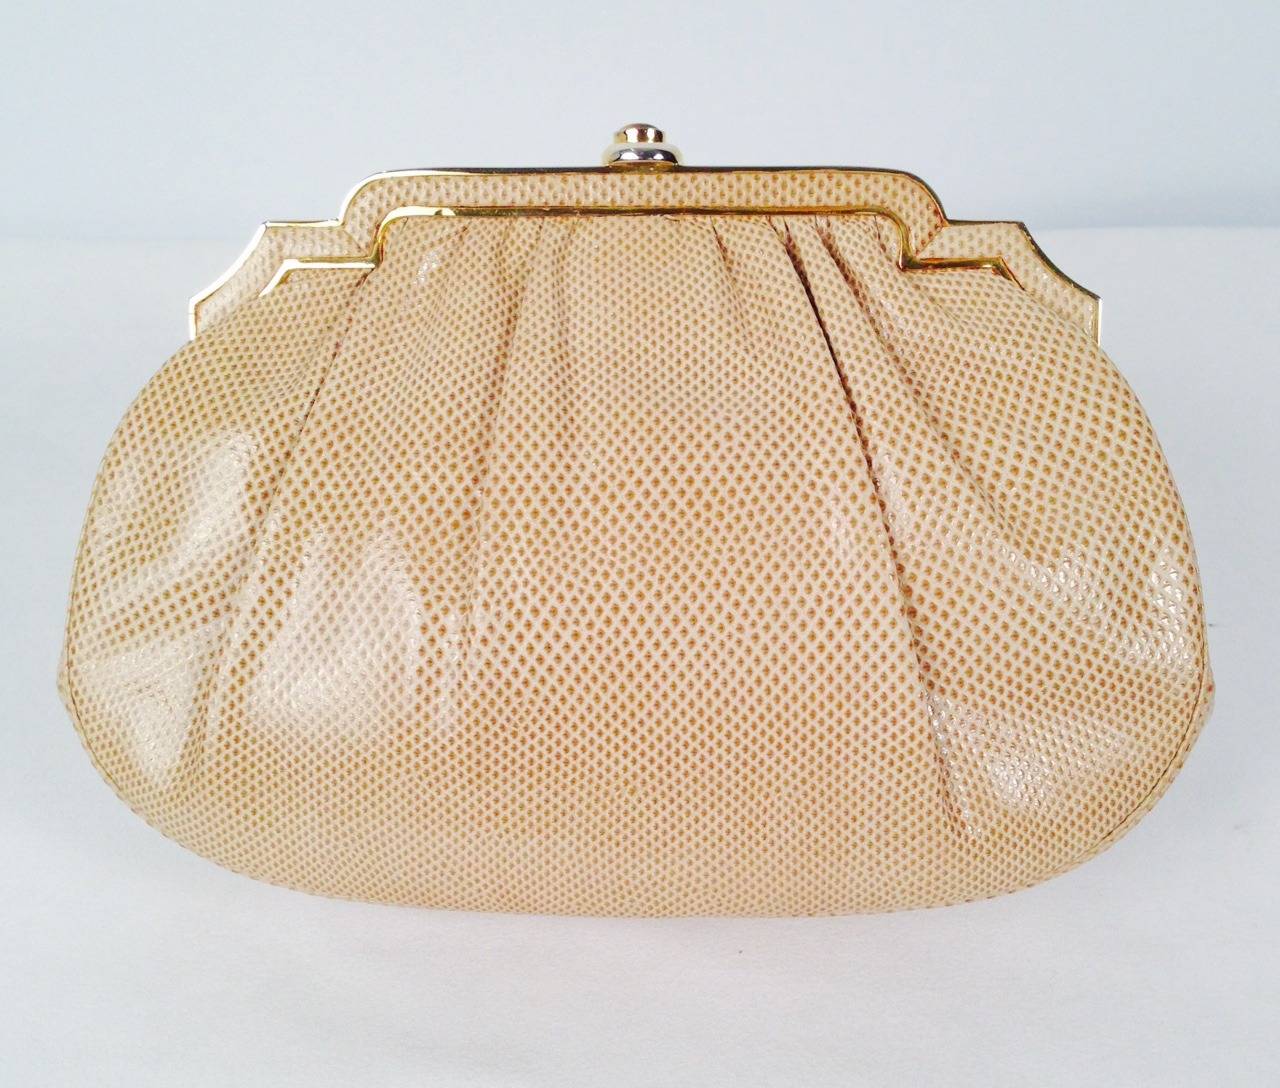 Vintage Taupe Lizard Evening Bag is highly desired by all collectors of Judith Leiber! Features slightly gathered, butter-soft lizard skin. Bag easily converts from clutch to shoulder bag with minimal effort!  Advanced design accommodates more items